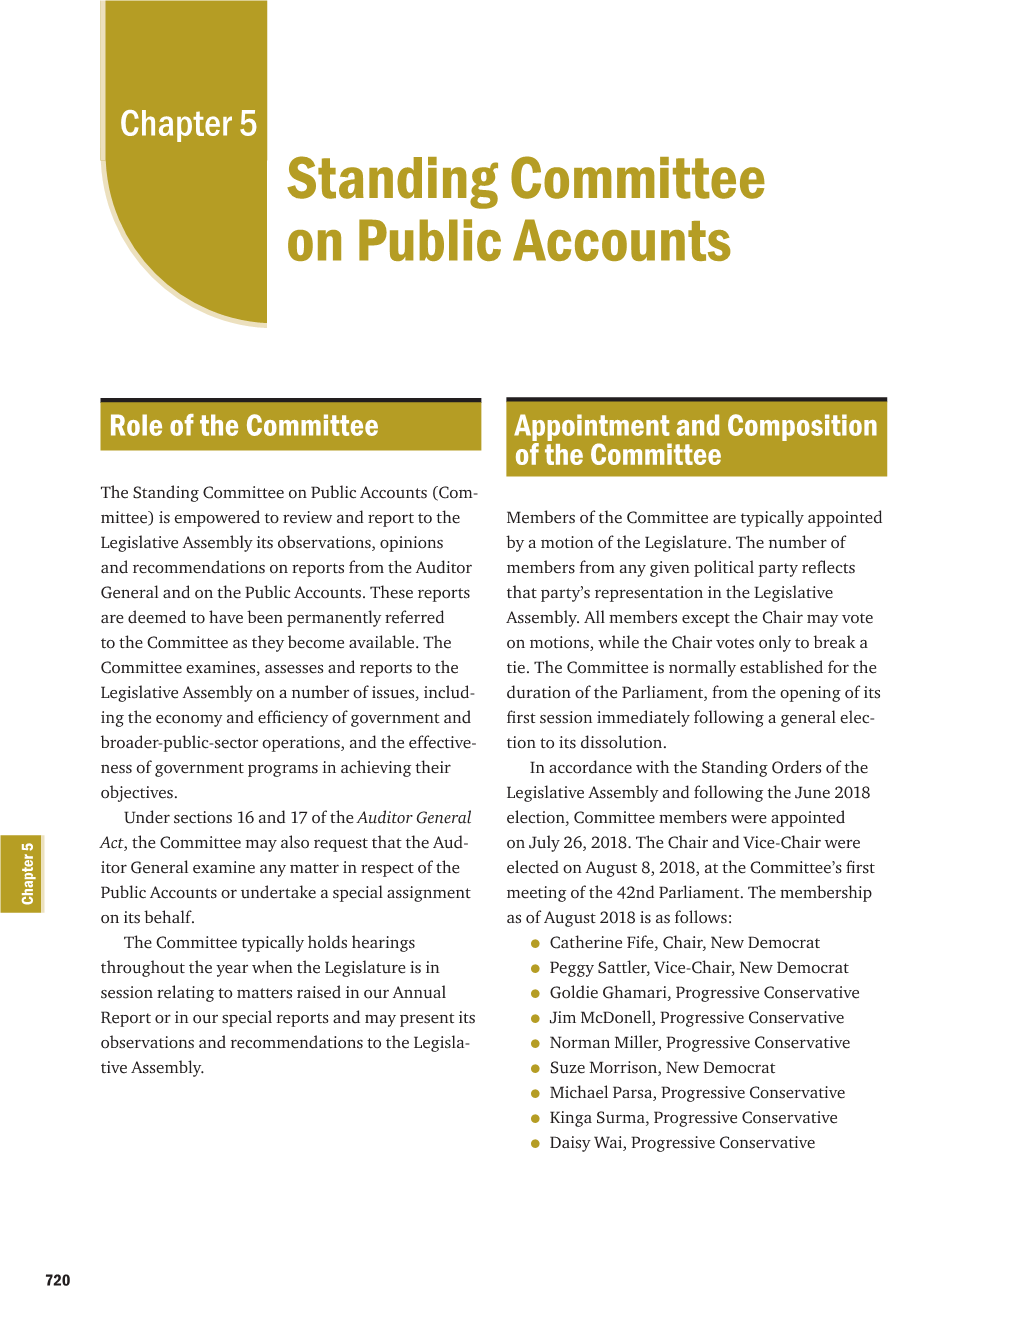 Standing Committee on Public Accounts Committee Standing - - - - - 721